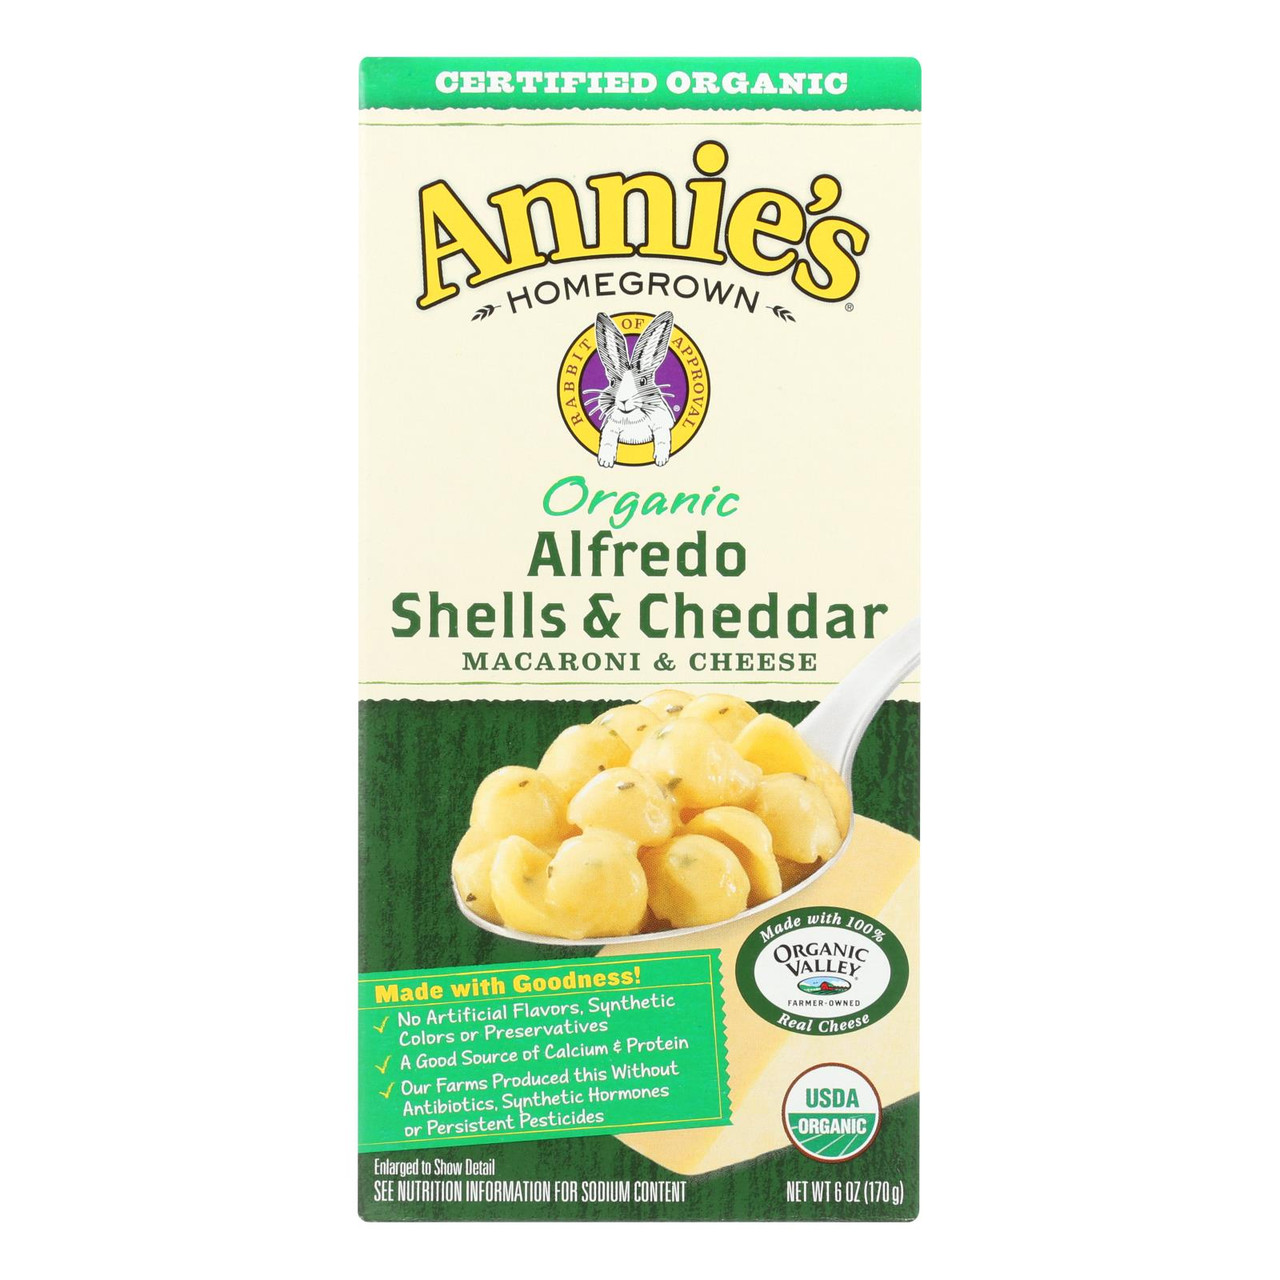 Annies Homegrown Rice Pasta Shells With White Cheddar - 6 oz box